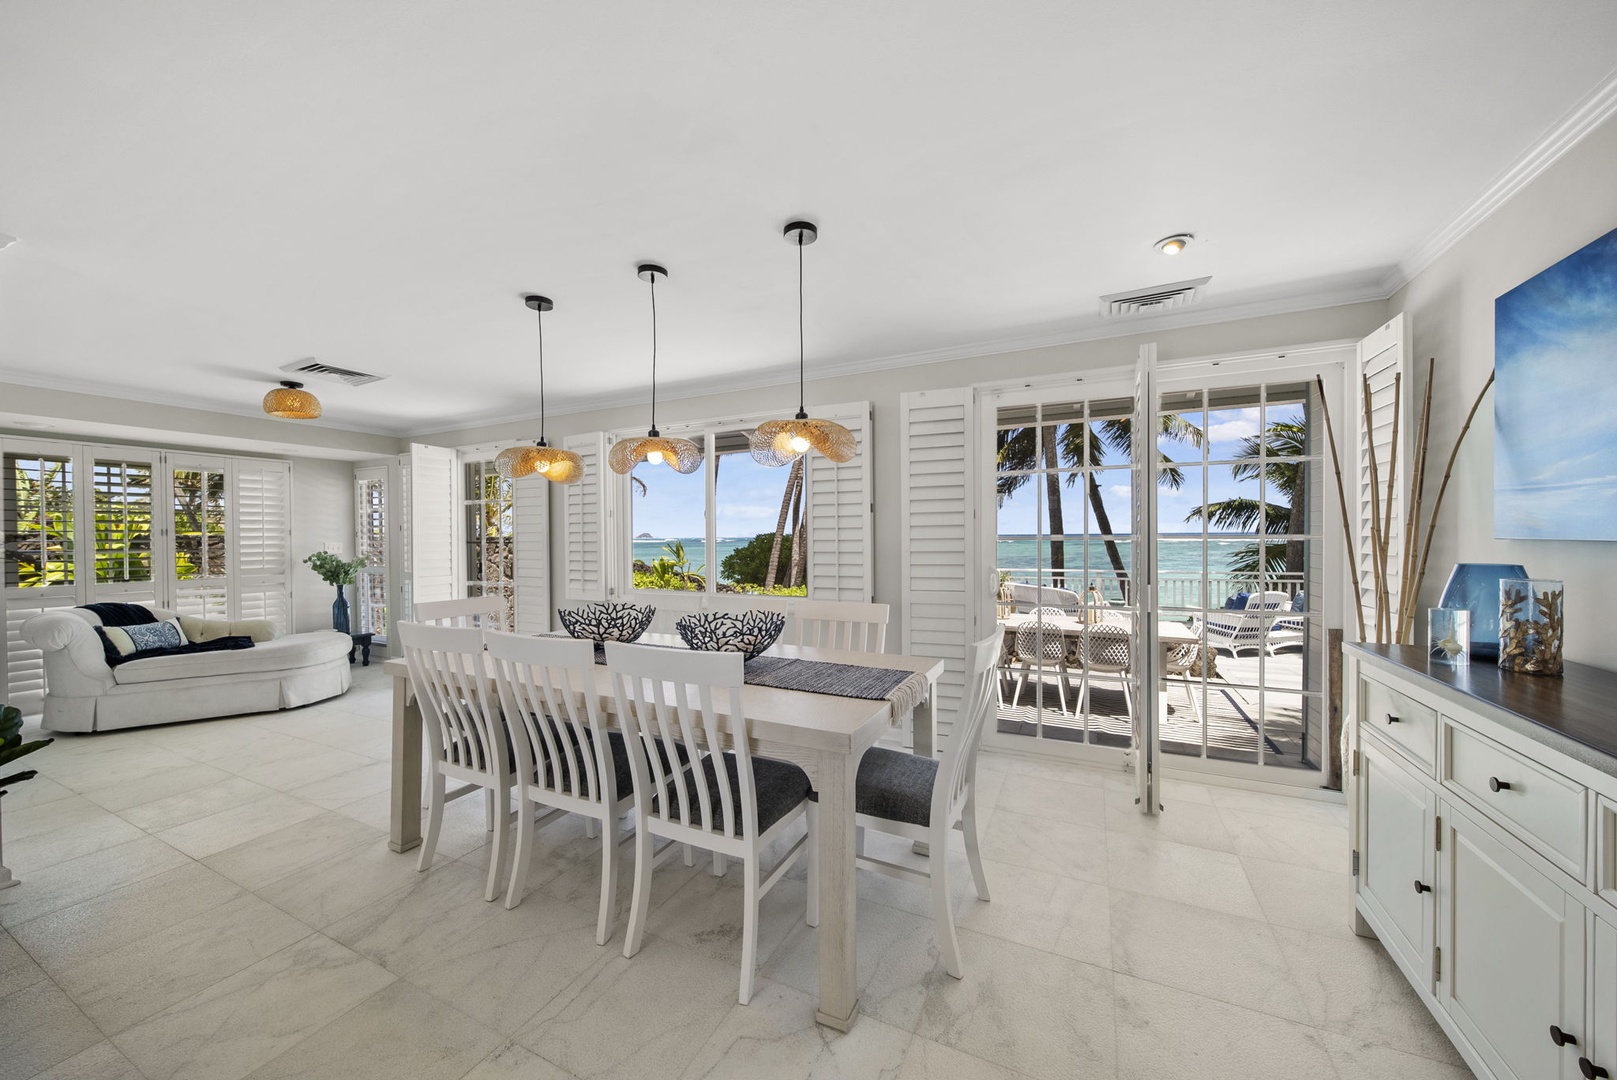 Waimanalo Vacation Rentals, Mana Kai at Waimanalo - Dine amidst panoramic vistas, where every meal becomes an unforgettable experience enveloped in natural beauty.